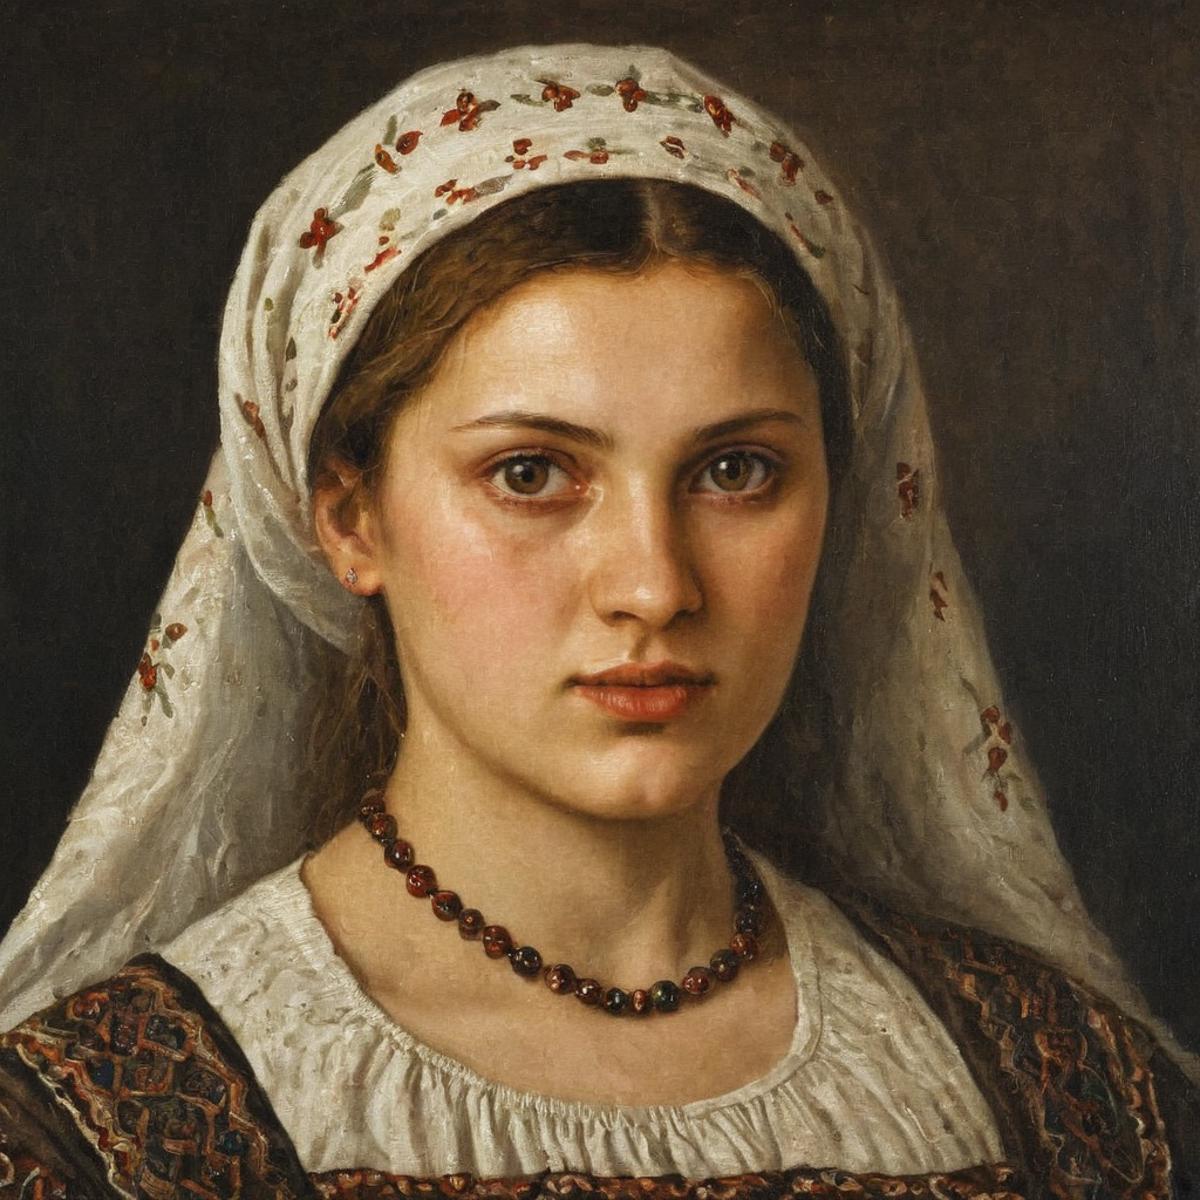 A Painted Portrait of a Woman with a Floral Head Scarf, Staring Straight into the Camera.